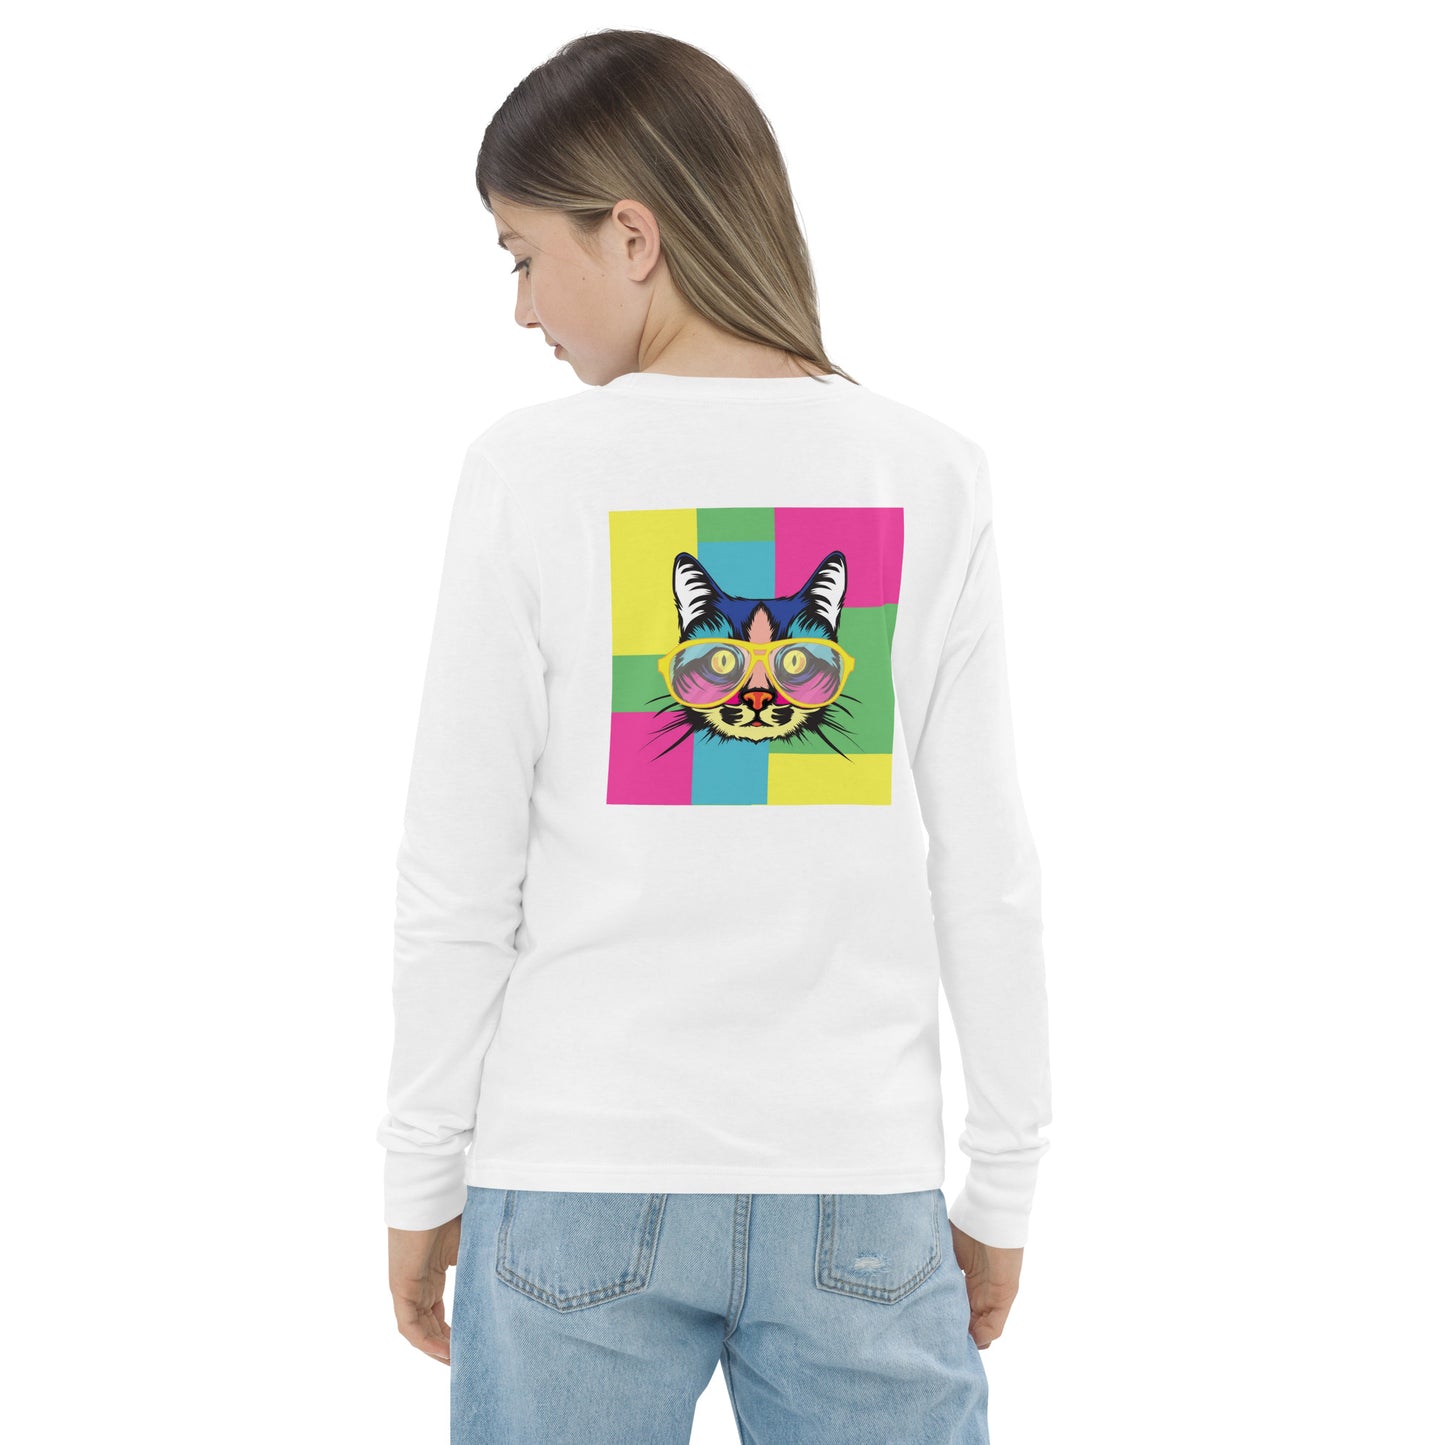 Youth long sleeve tee with Pop art design sourced Vecteezy.com